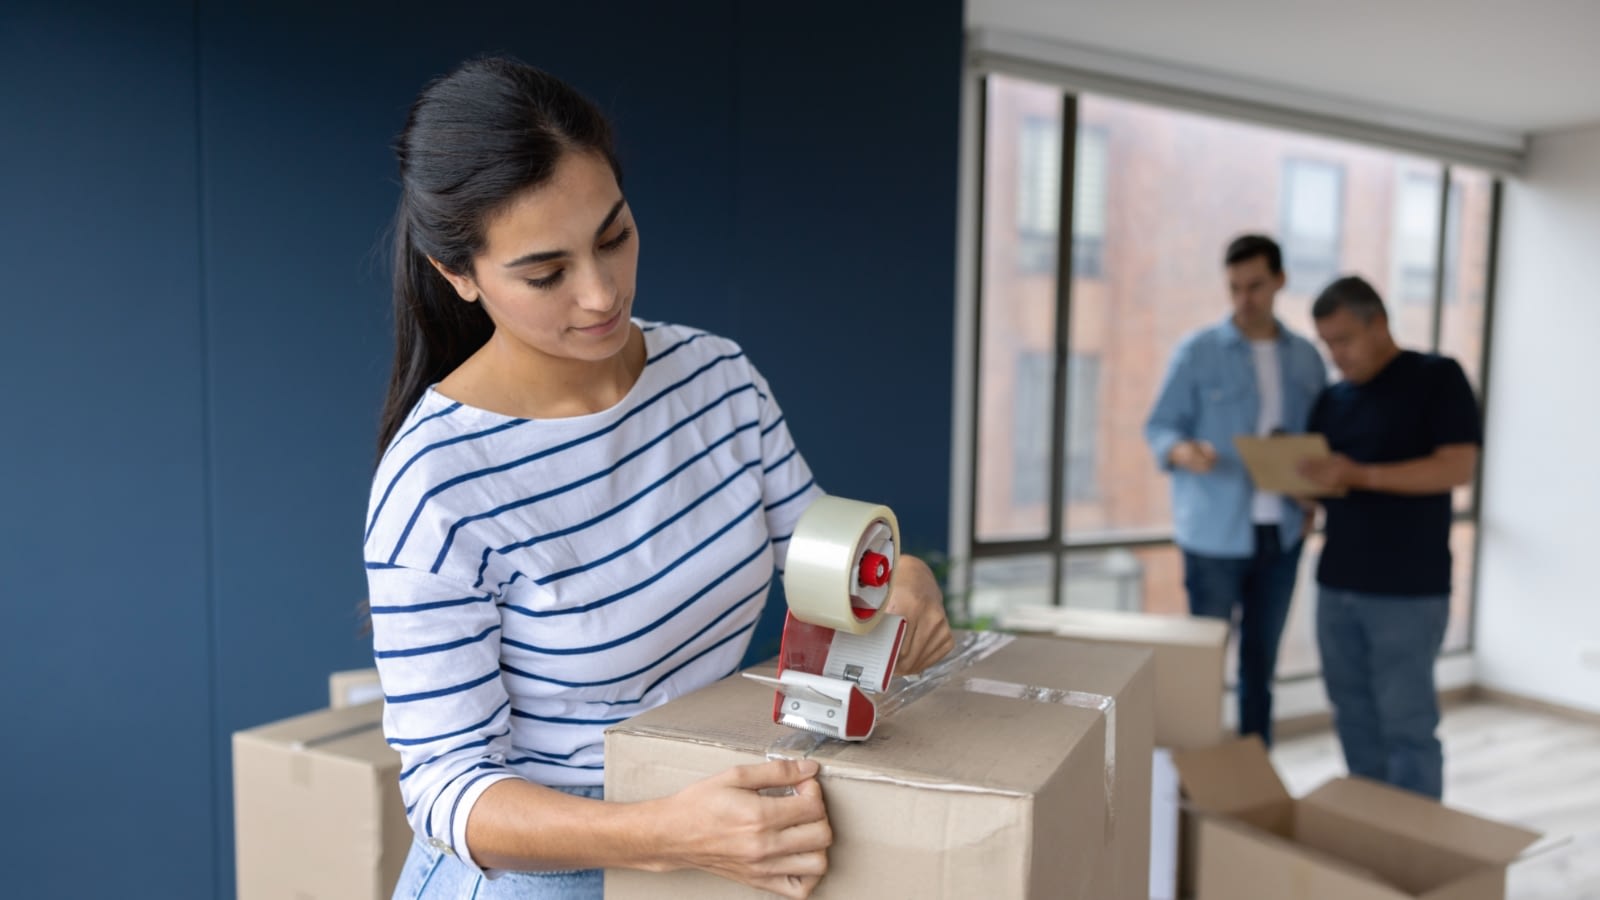 woman packing up boxes while two men discuss paperwork